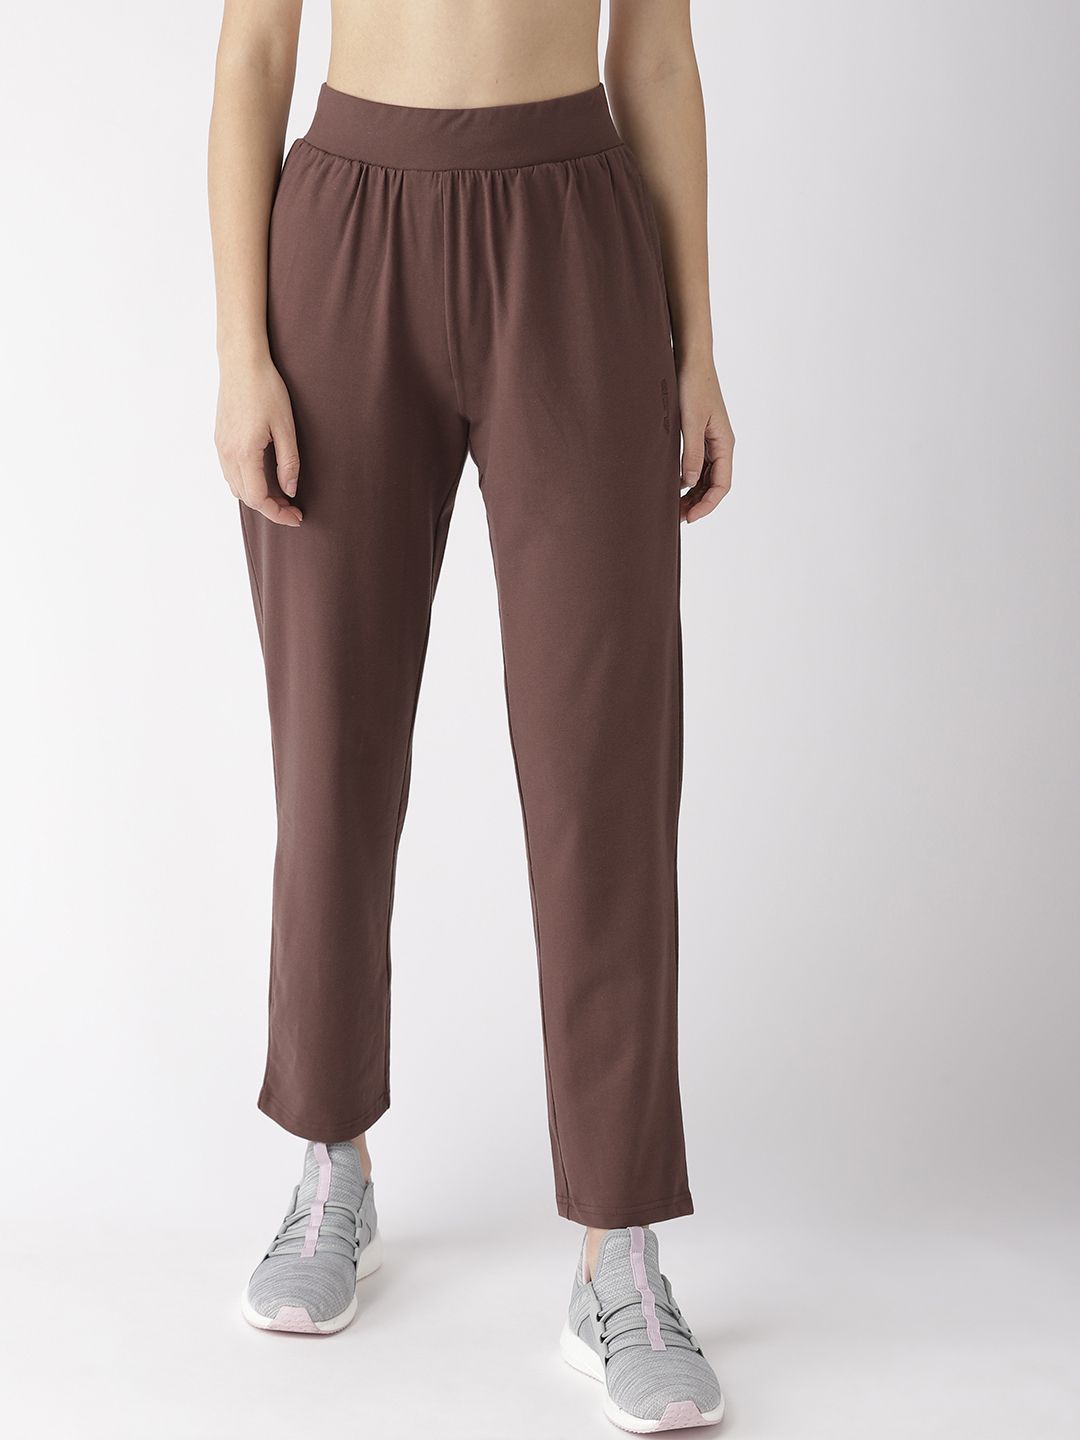 Track Pants Price in India  Track Pants Price List in India 